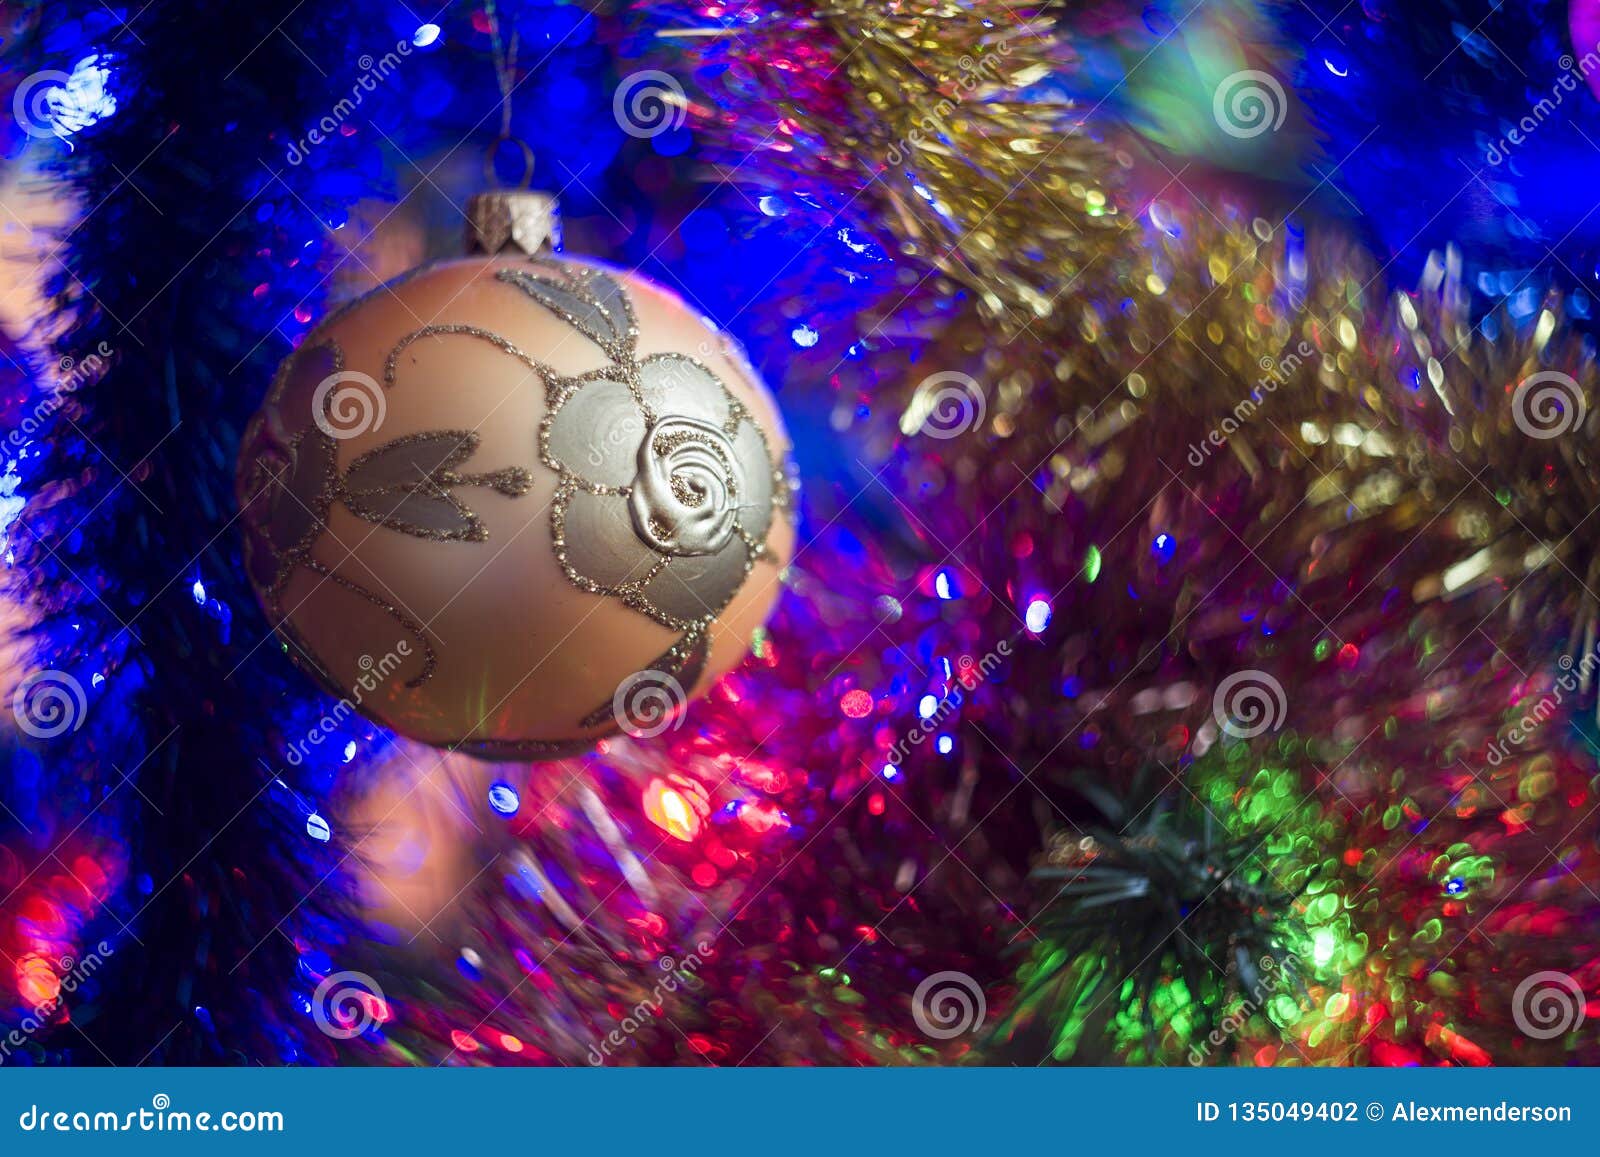 Christmas Tree Background with Colorful Christmas Lights and Baubles ...